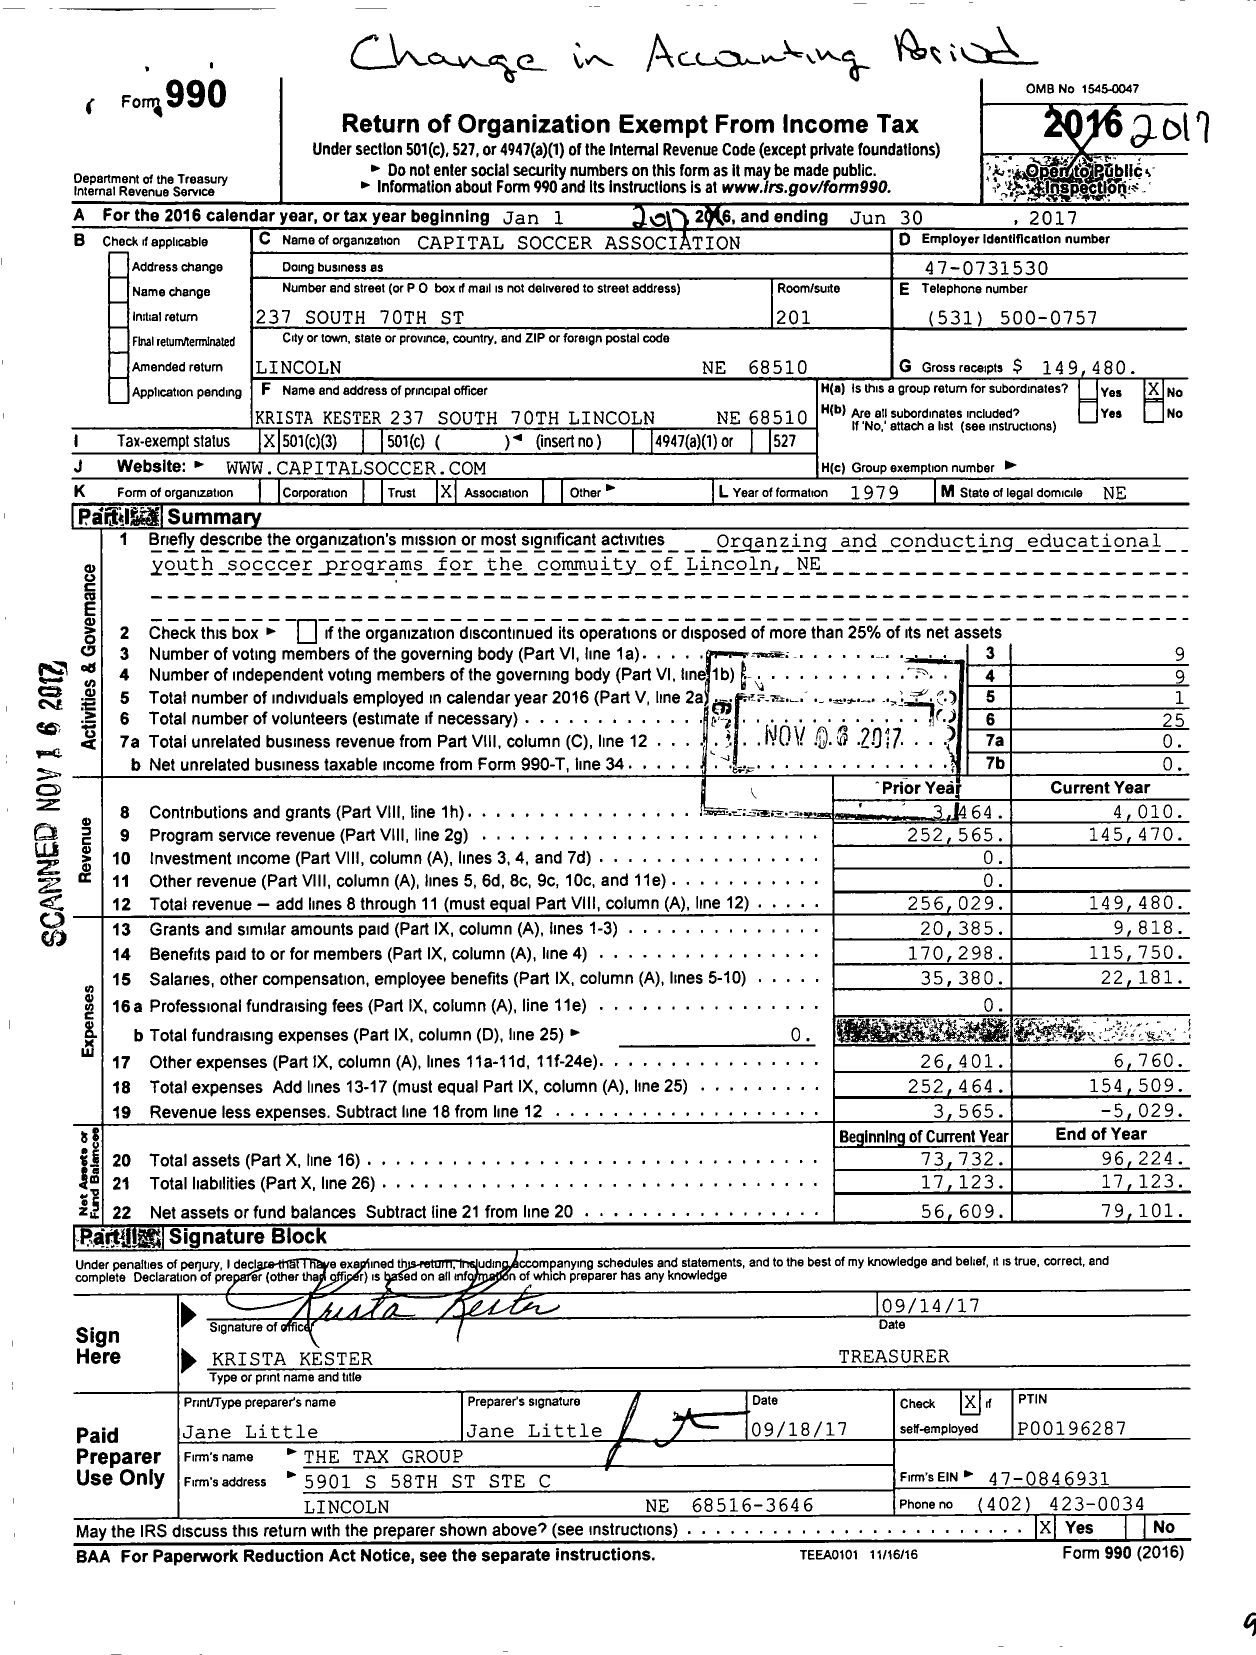 Image of first page of 2016 Form 990 for Capital Soccer Association